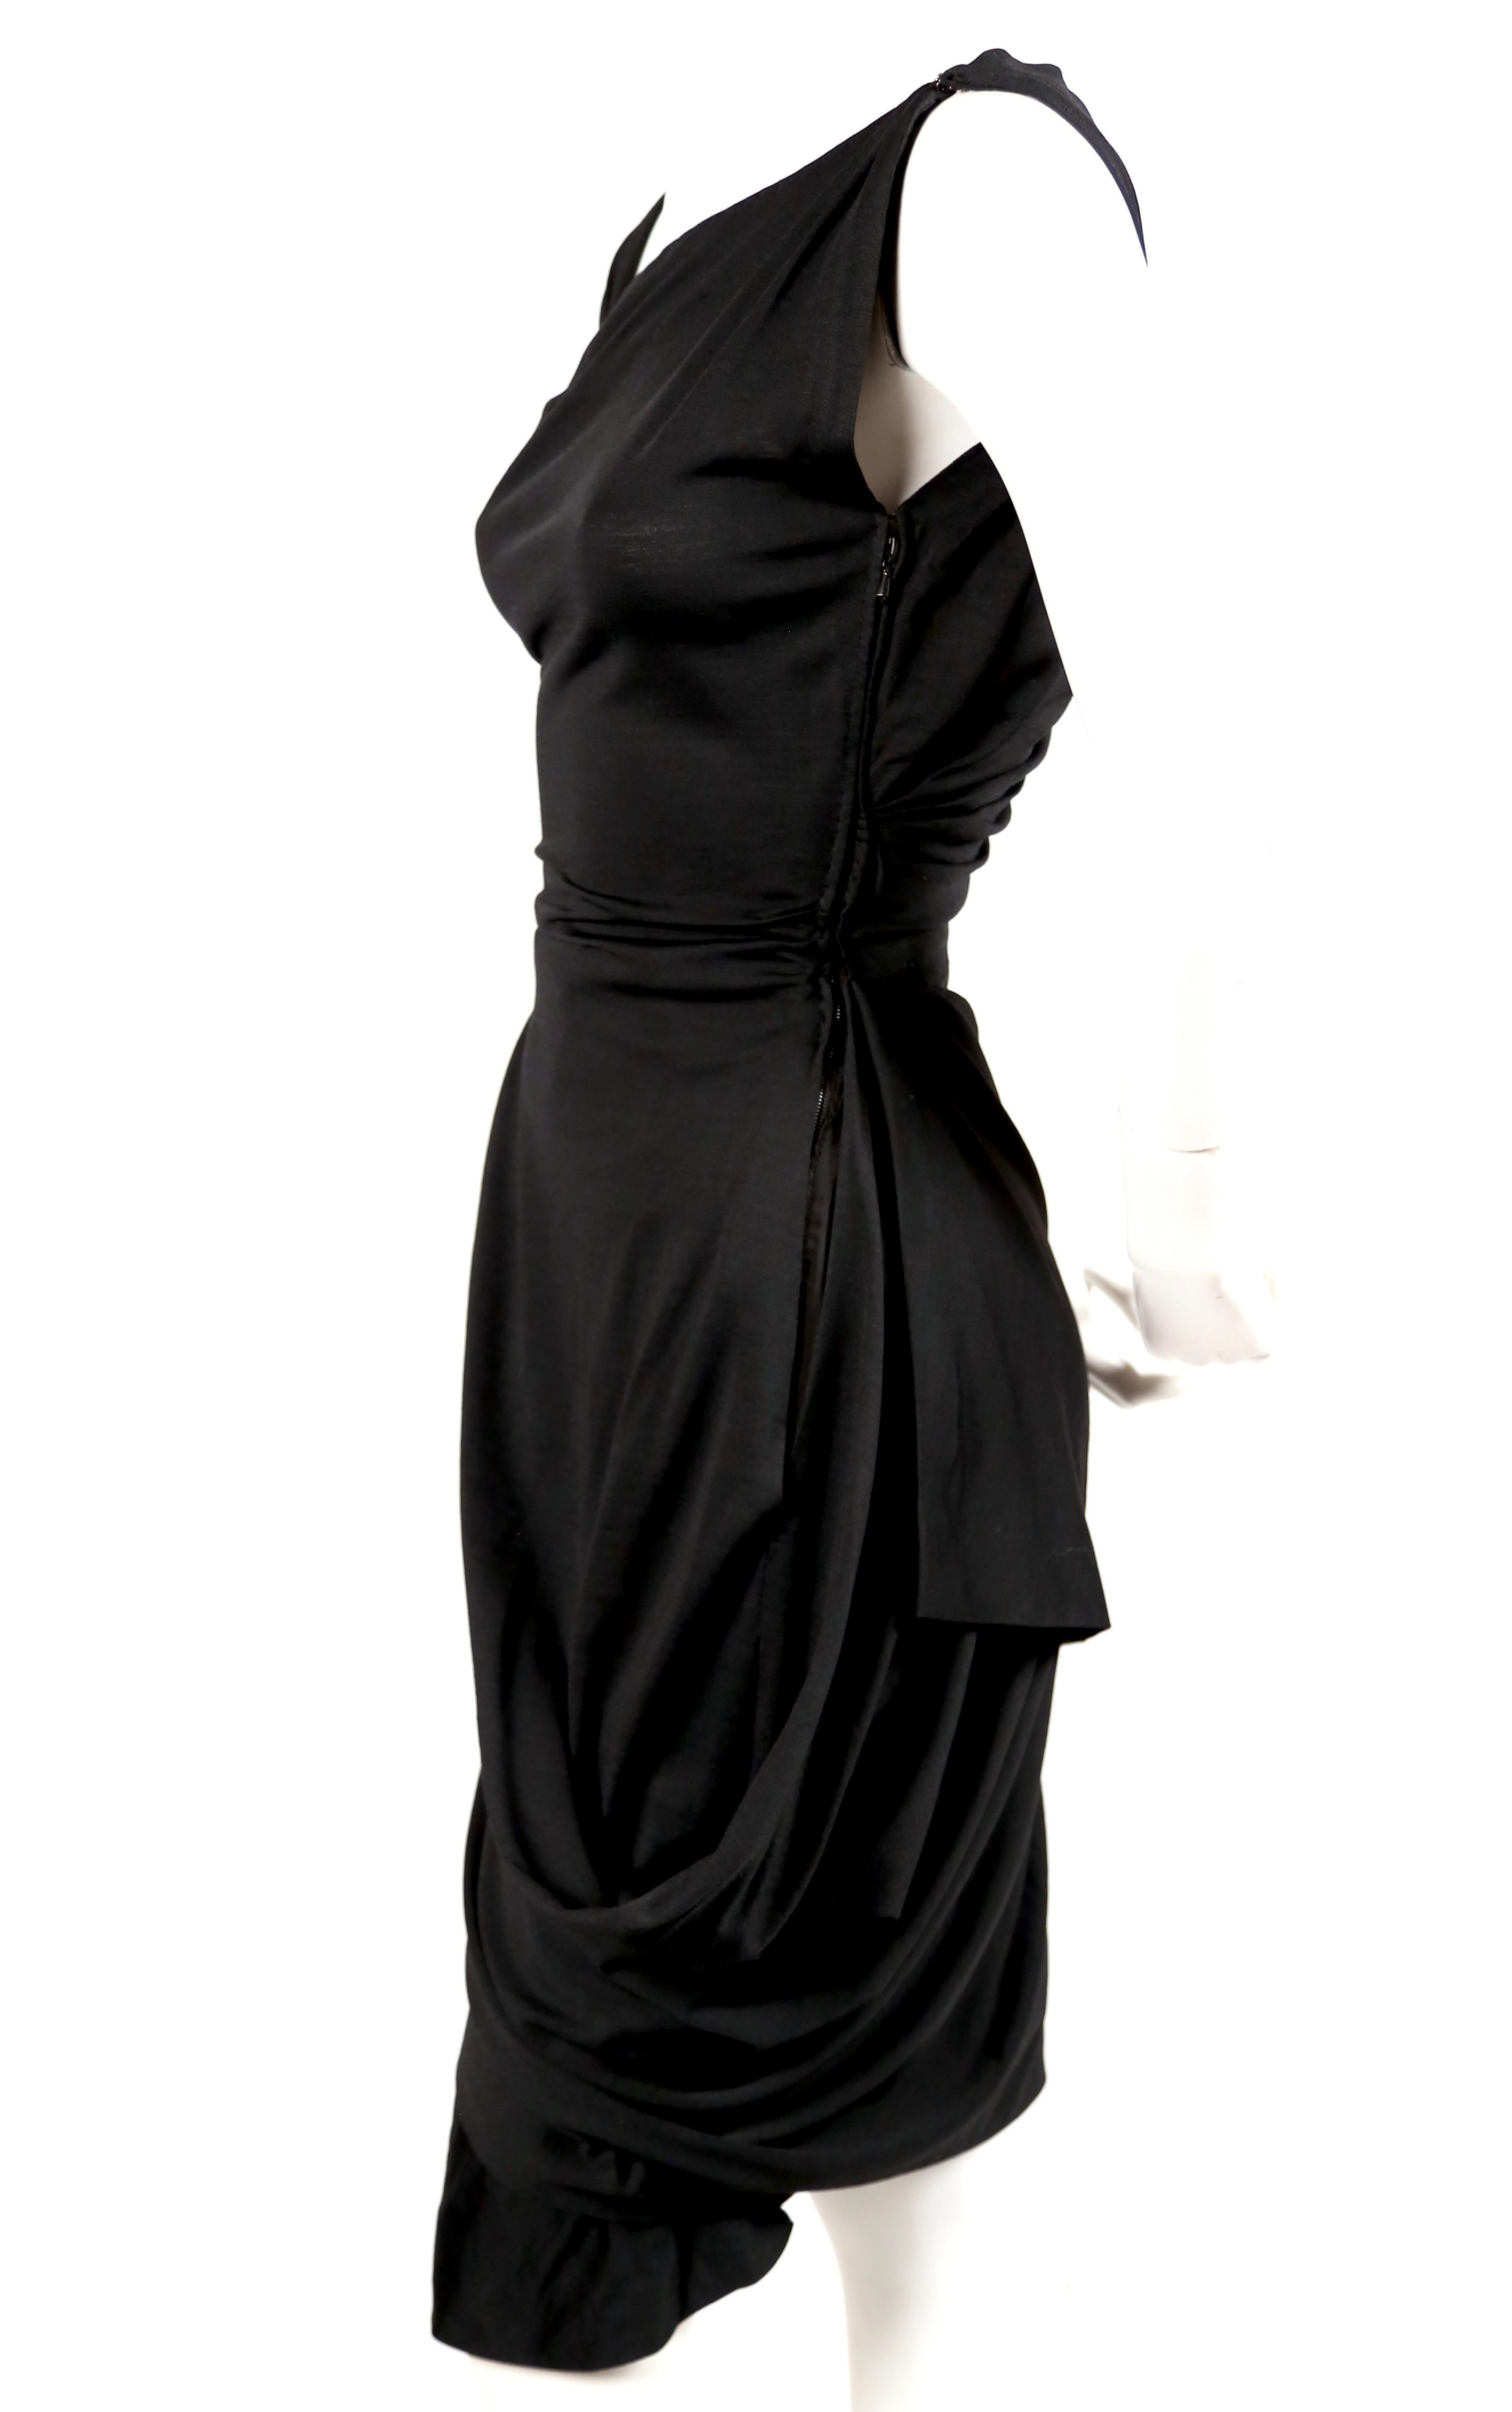 Very rare, jet black, silk-jersey, haute couture dress with asymmetrical cut and draping from Pedro Rodriguez dating to the 1950's. Best fits a US 2. Approximate measurements: bust 32